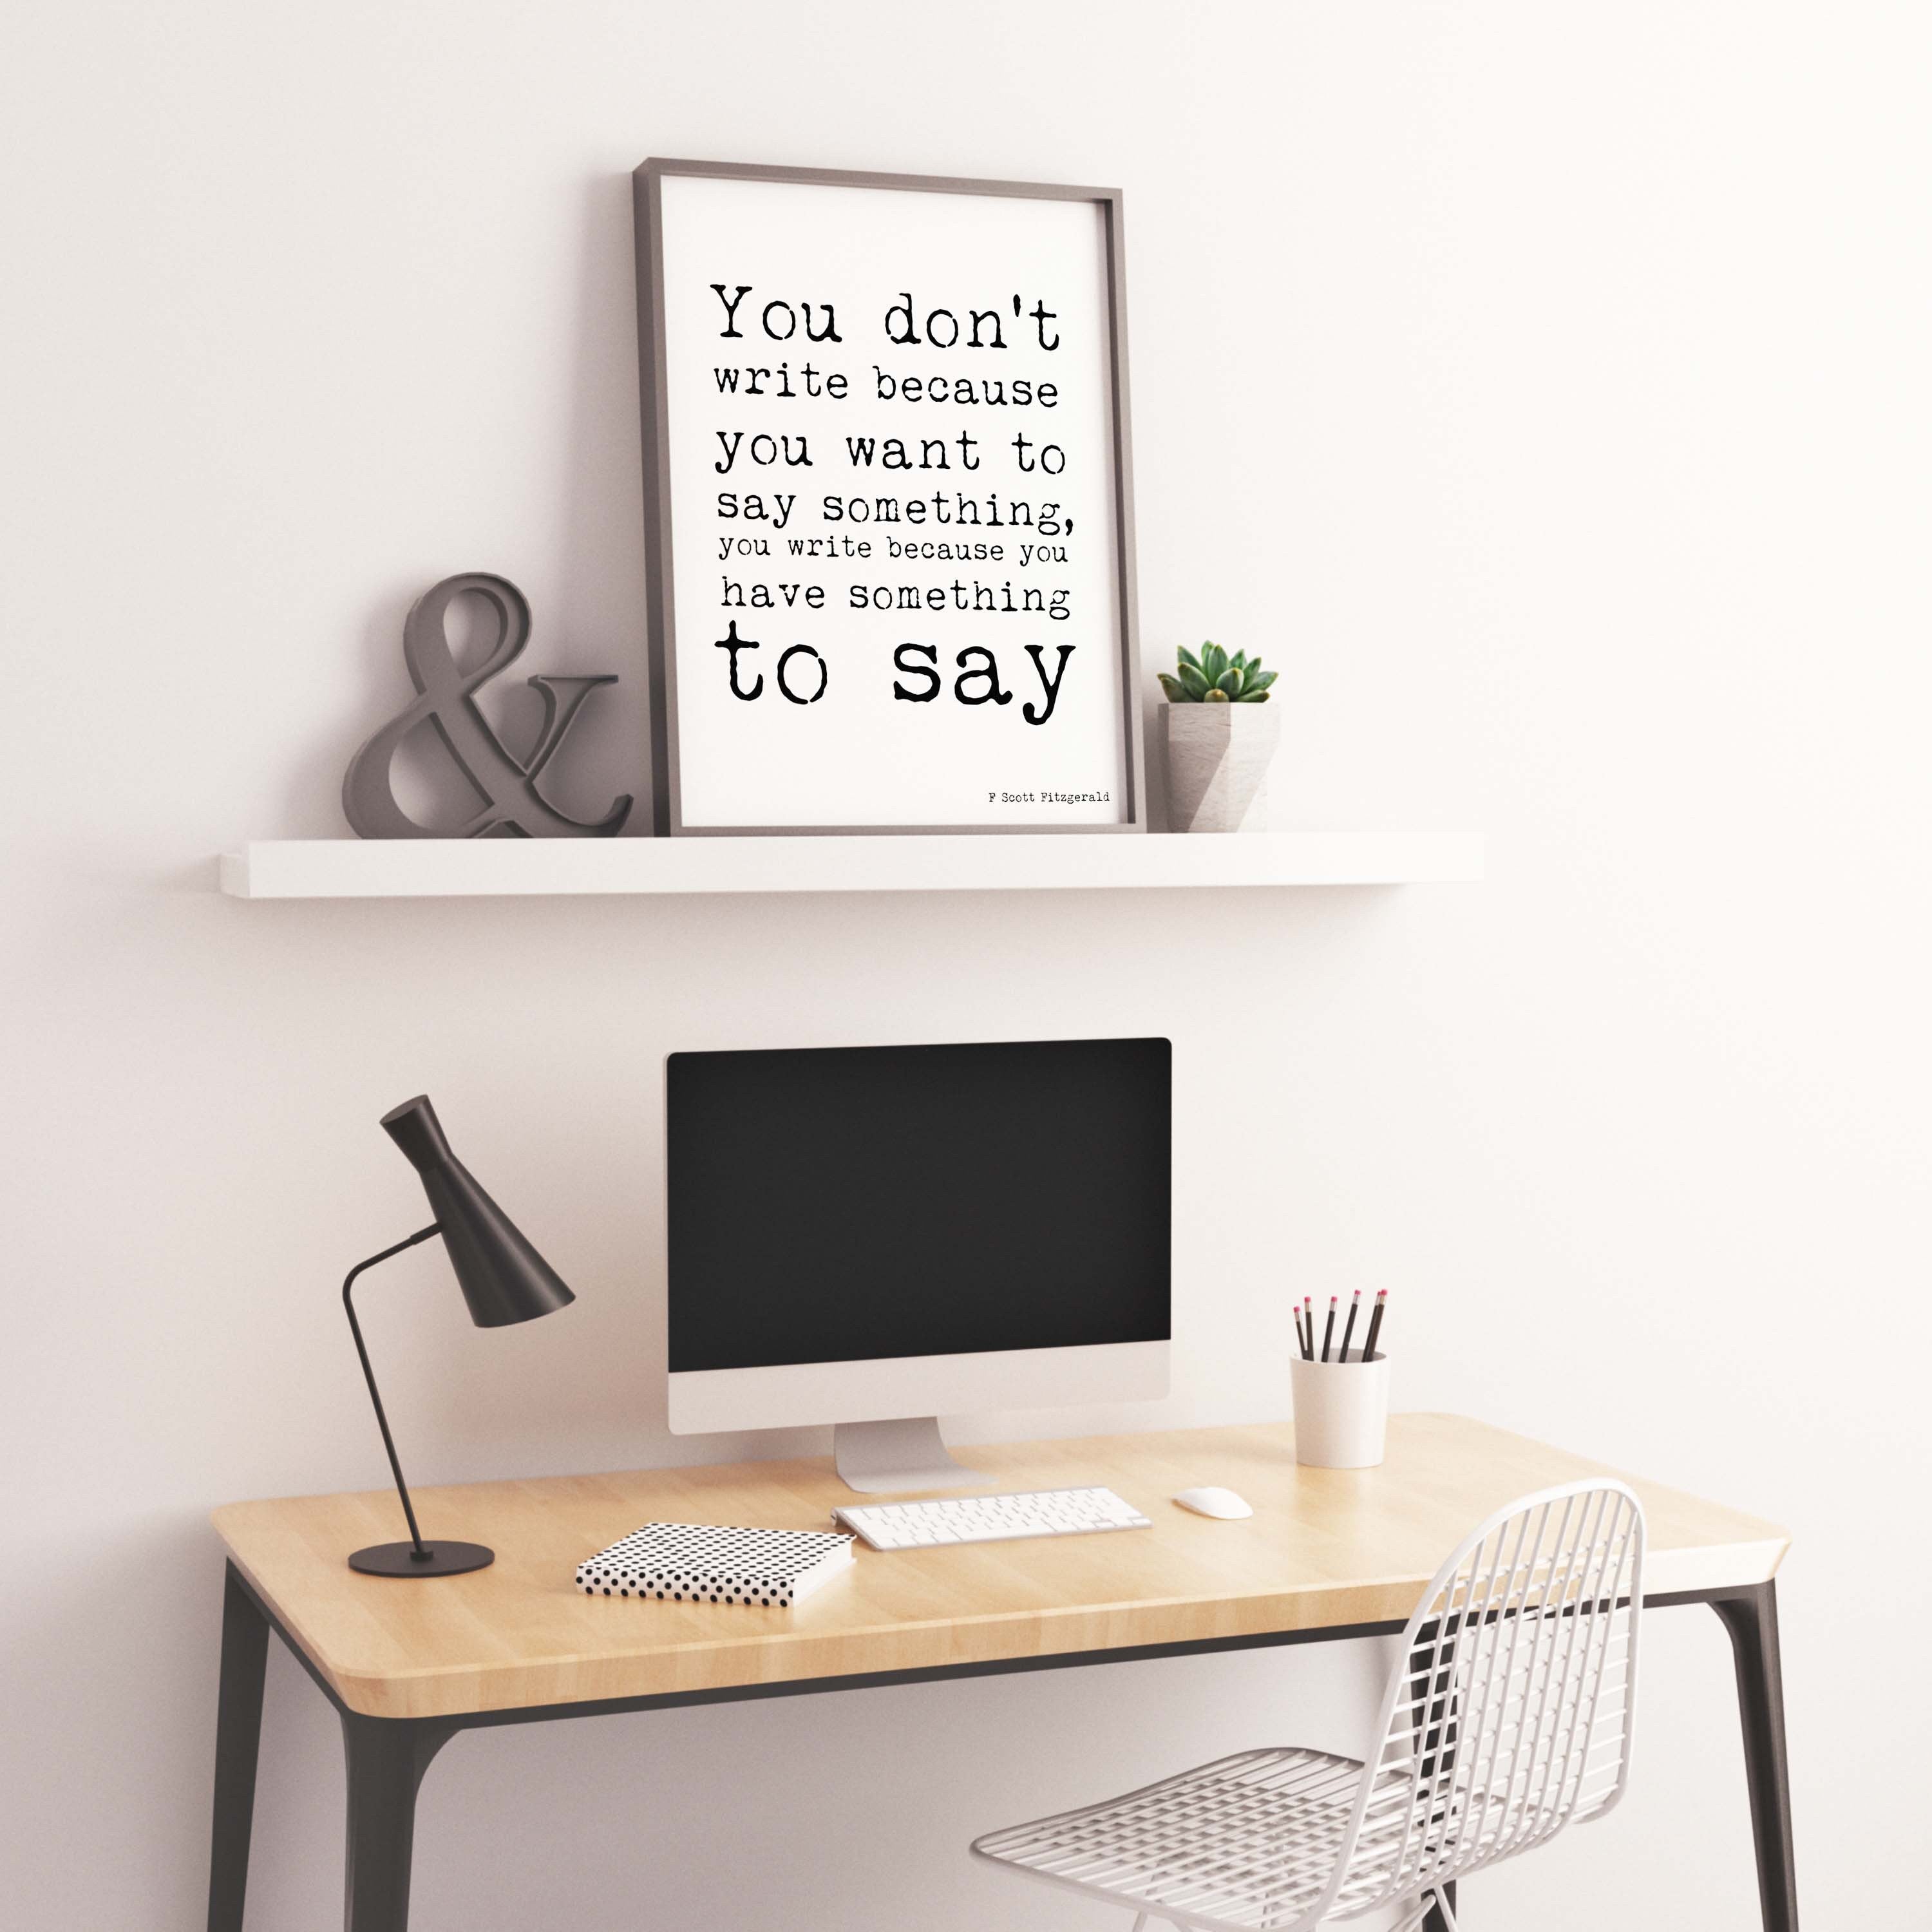 F Scott Fitzgerald Writing Quote Print, You Write Because You Have Something To Say